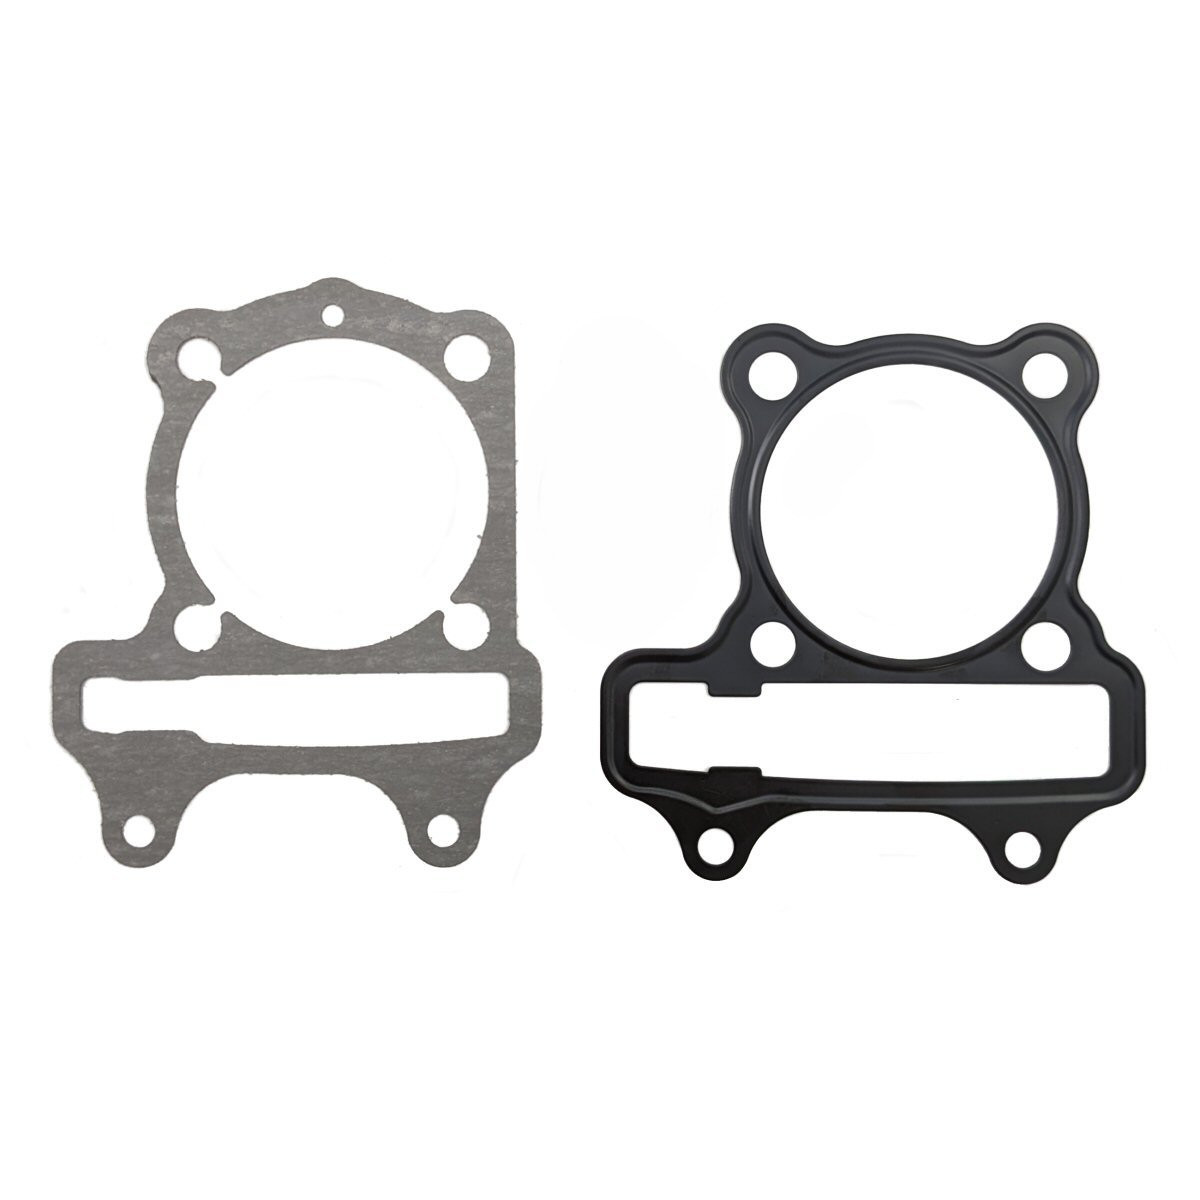 Universal Parts GY6 “200cc” 61mm Cylinder & Head Gasket Kit